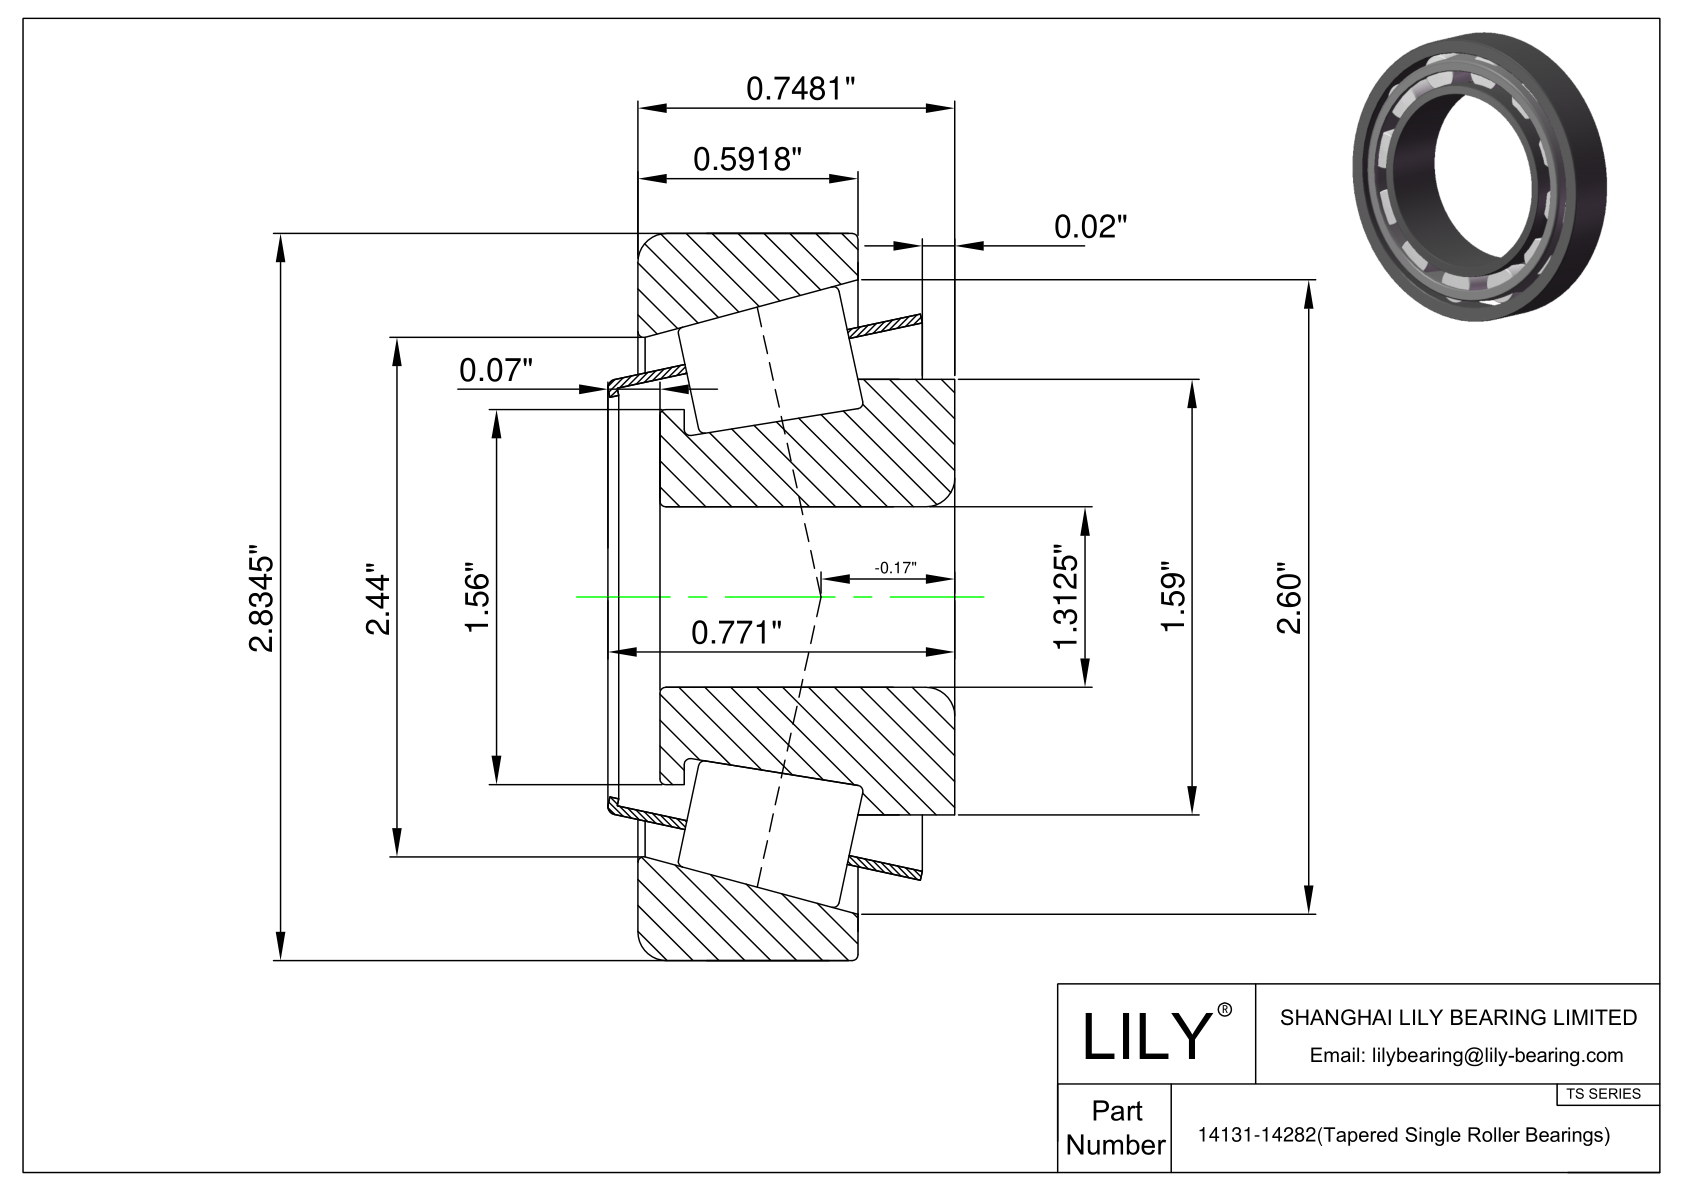 14131-14282 TS (Tapered Single Roller Bearings) (Imperial) cad drawing